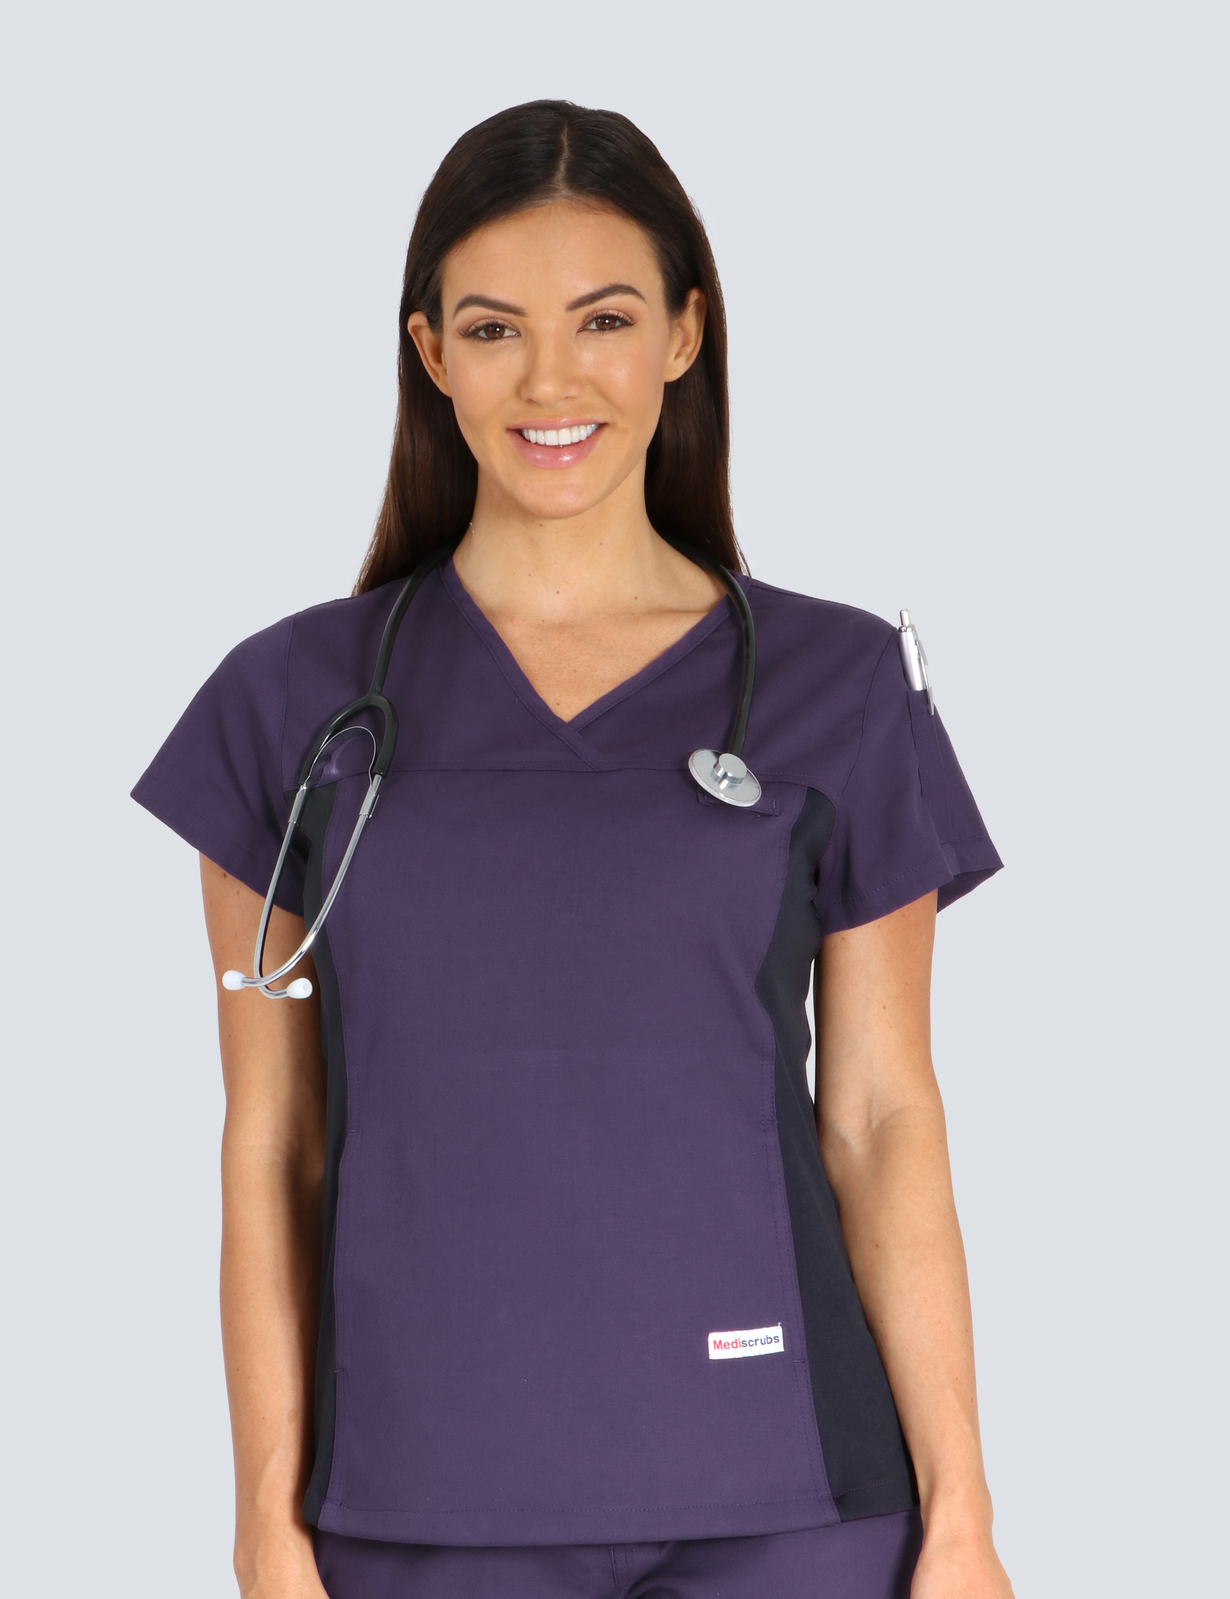 Metro South Oral Health - Therapists (Women's Fit Spandex Scrub Top in Aubergine incl Logos)